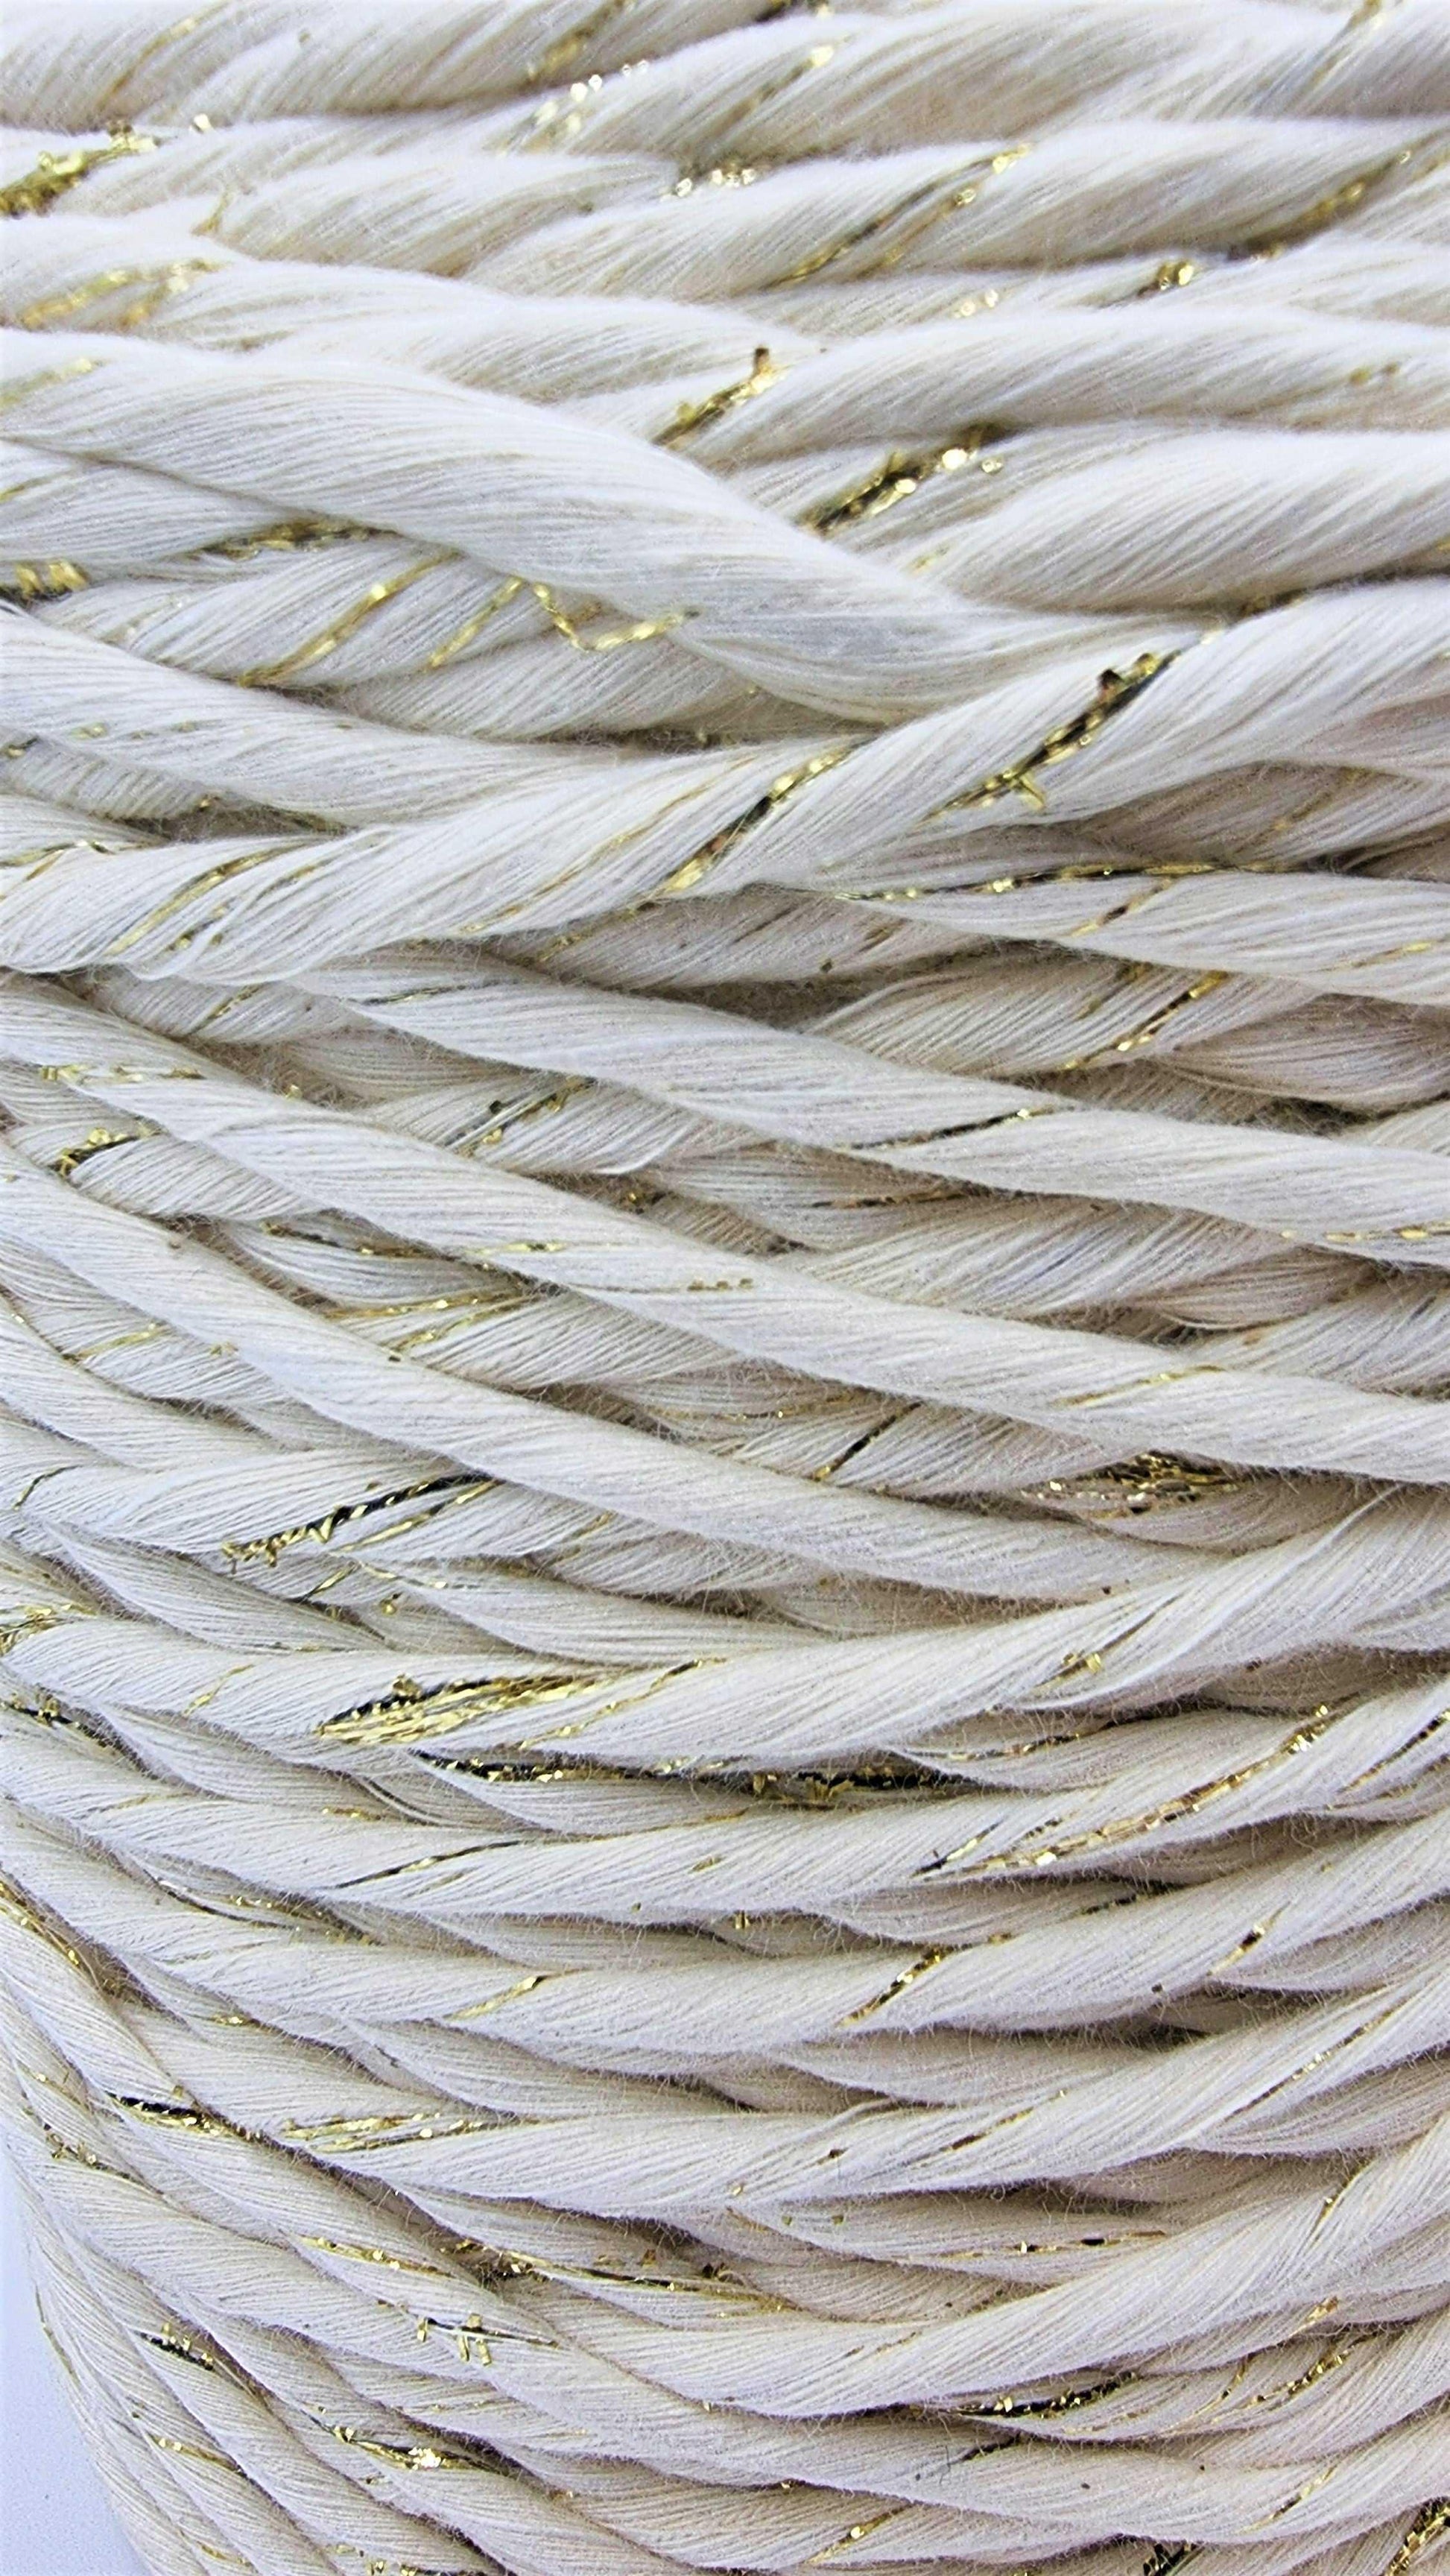 Shiny Gold Natural- 3MM Single Strand Luxe Cotton String 1KG Stardust Melbourne